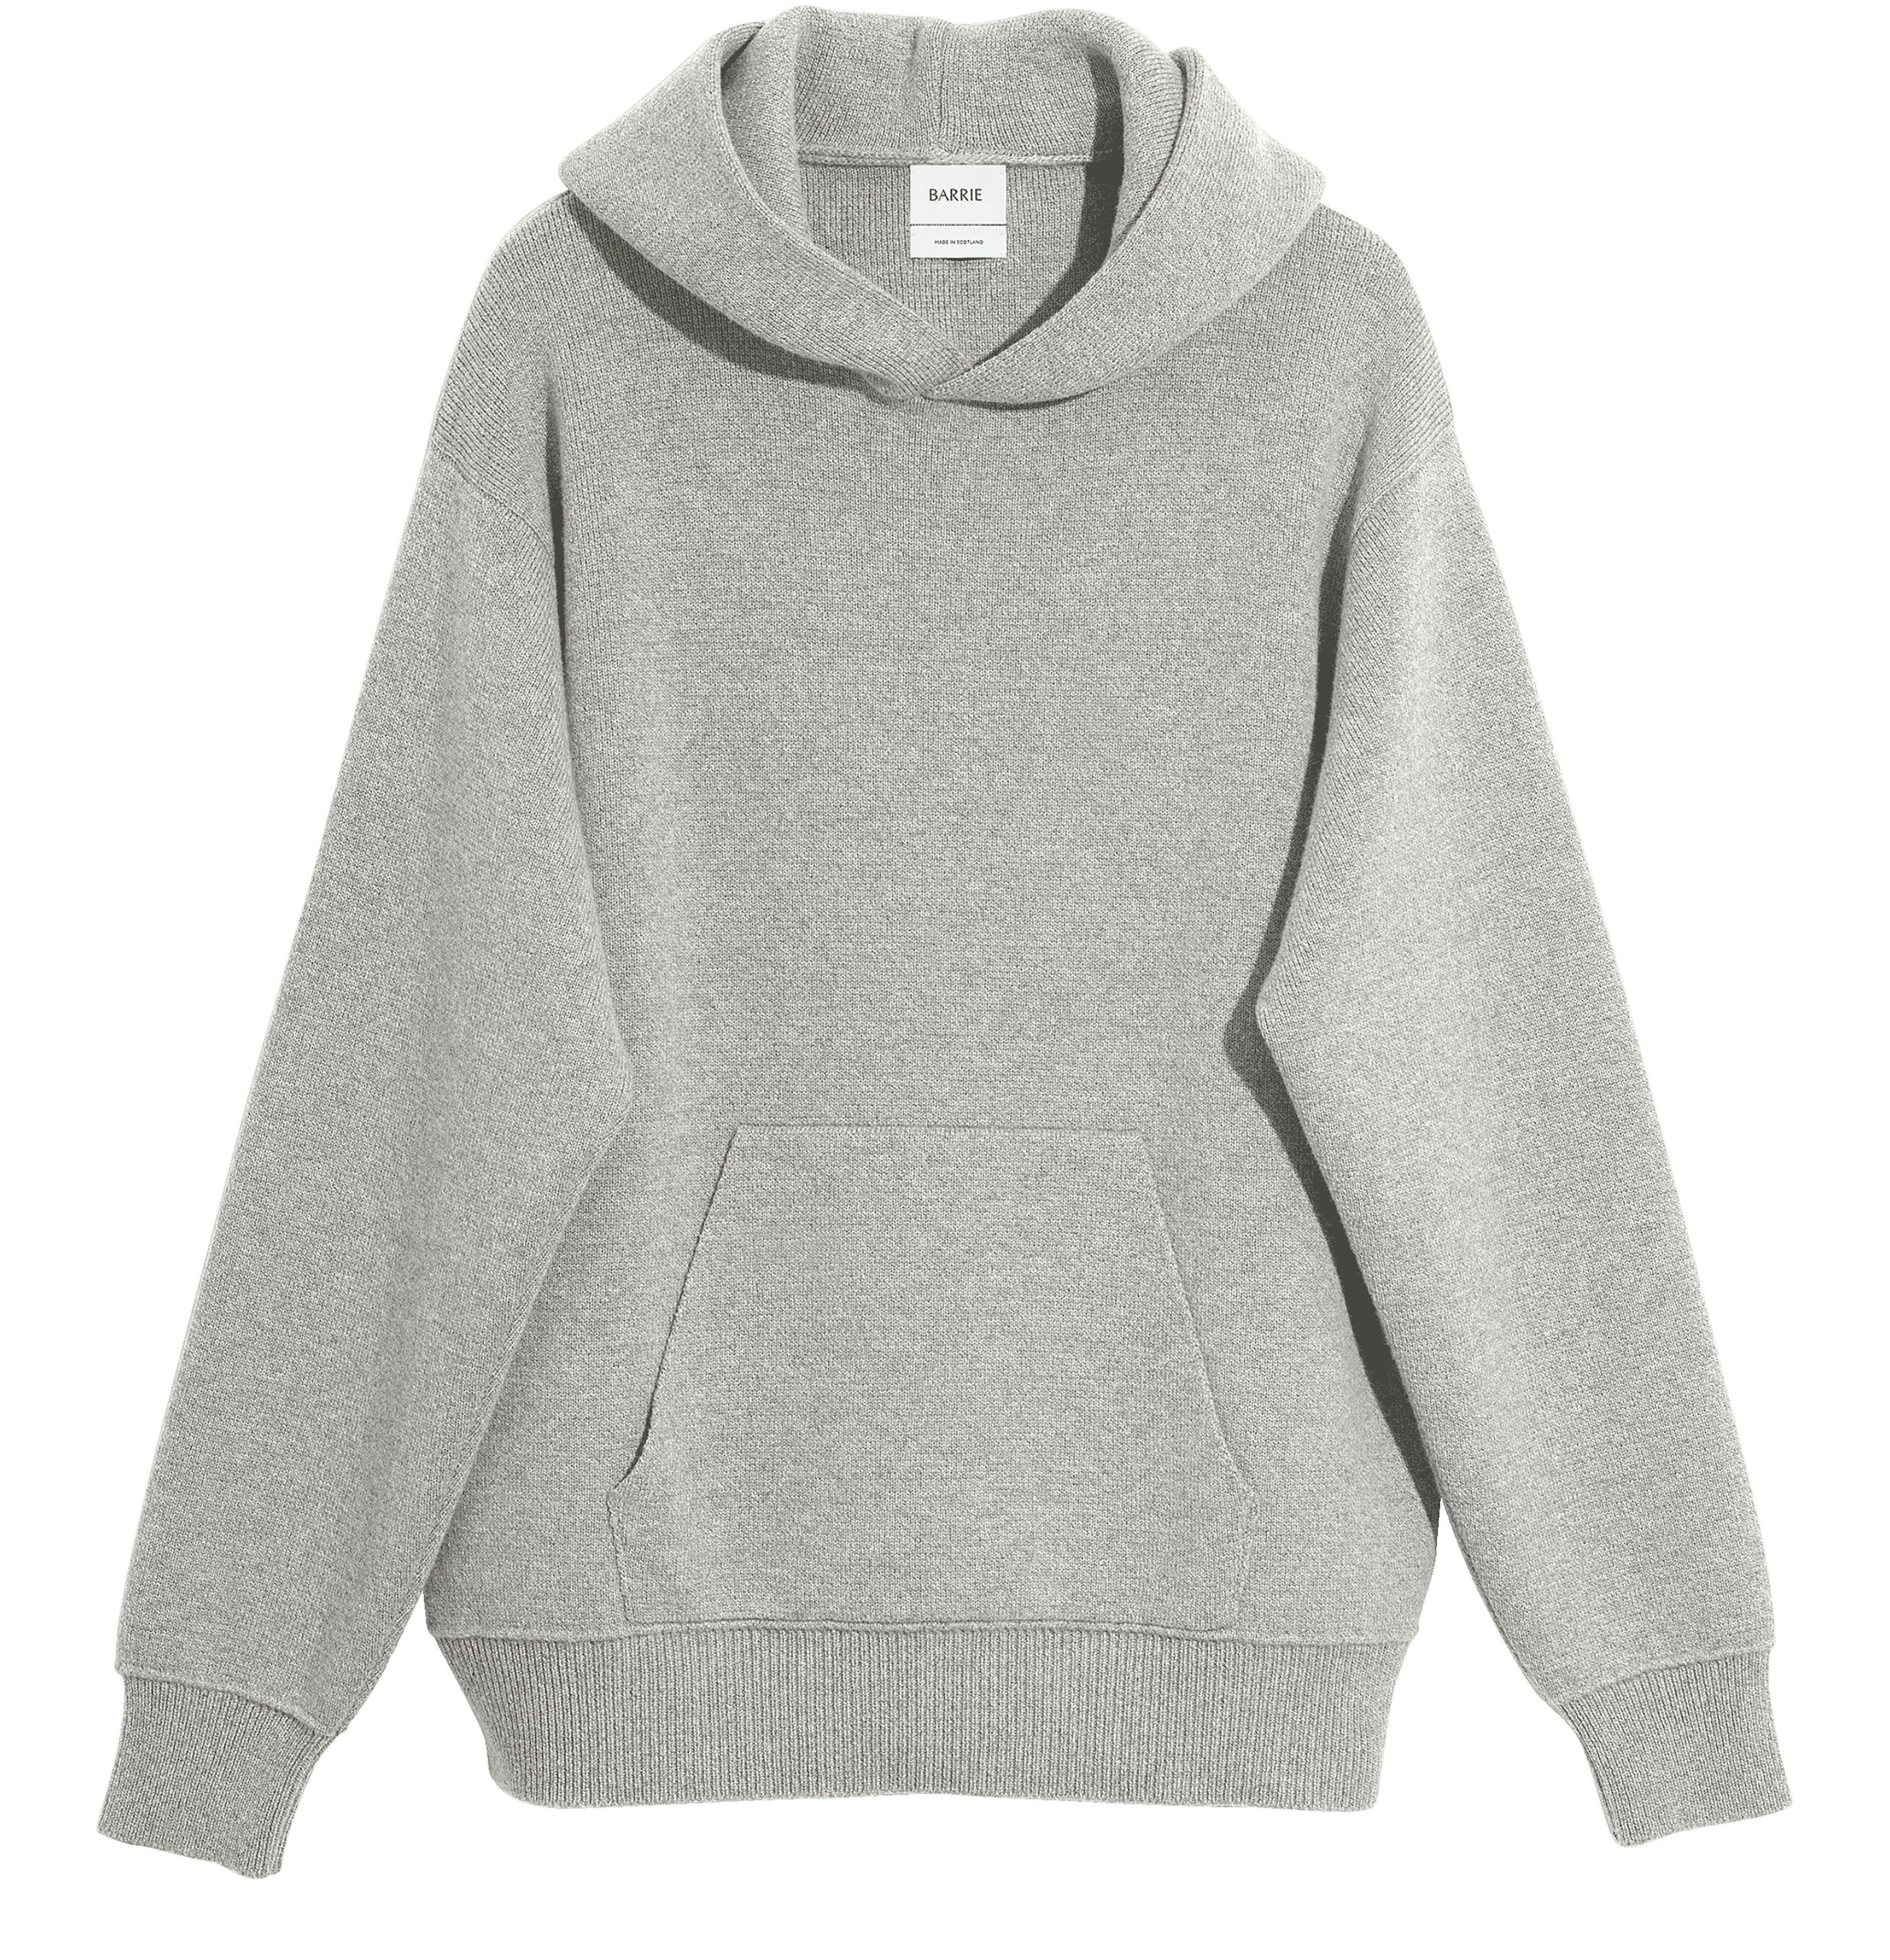 Barrie Sportswear cashmere and cotton hoodie